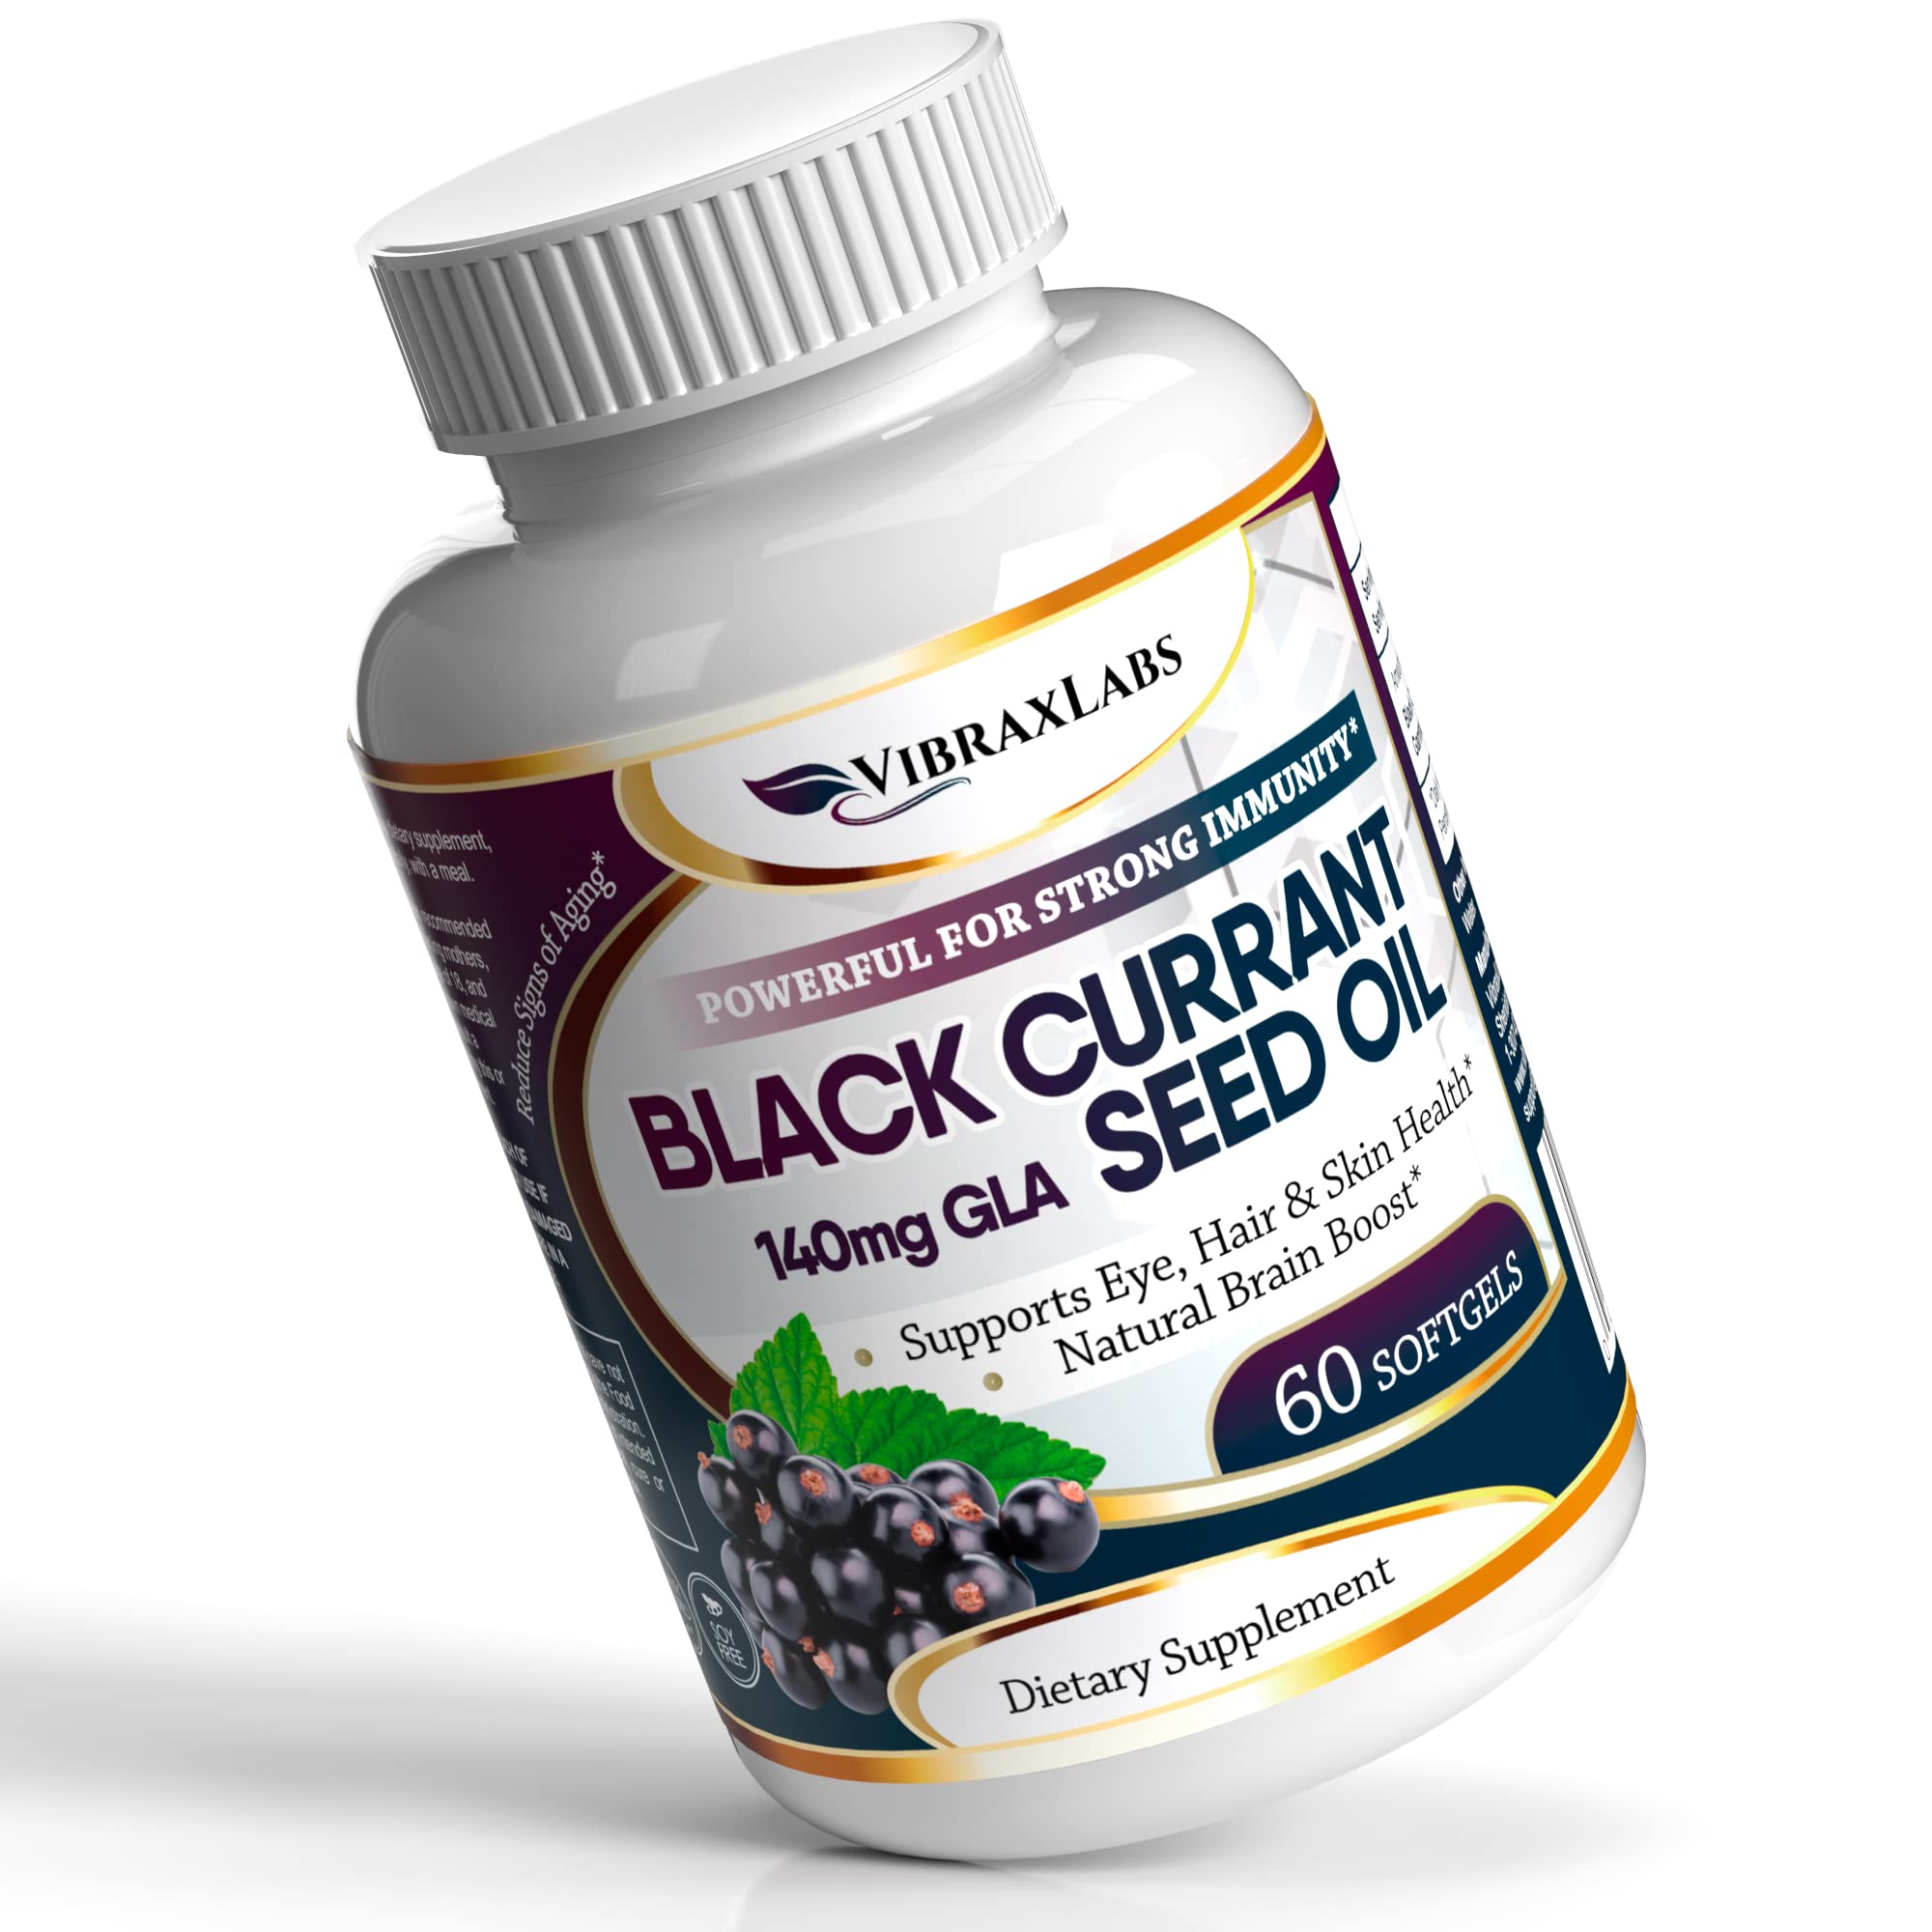 Black Currant Oil 1000mg - Hexane Free Natural Anti Aging Antioxidant with  High GLA Formula Supports Hair, Skin, Joint & Eye Health Premium Black  Currant Seed Oil Softgel Supplement